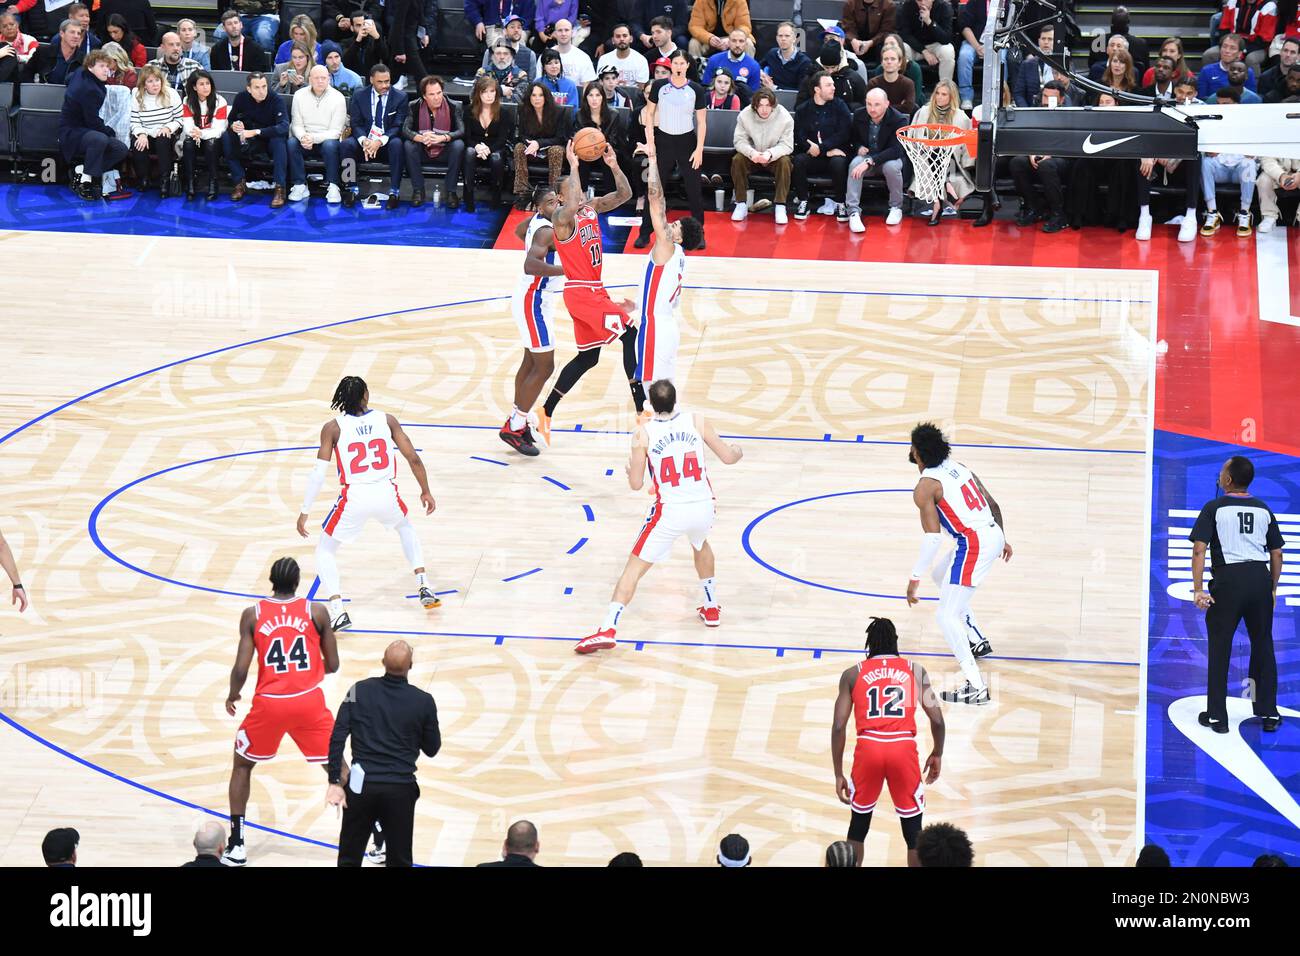 NBA Paris Game 2023 match between Detroit Pistons and Chicago Bulls at AccorHotels Arena on January 19, 2023 in Paris, France Stock Photo